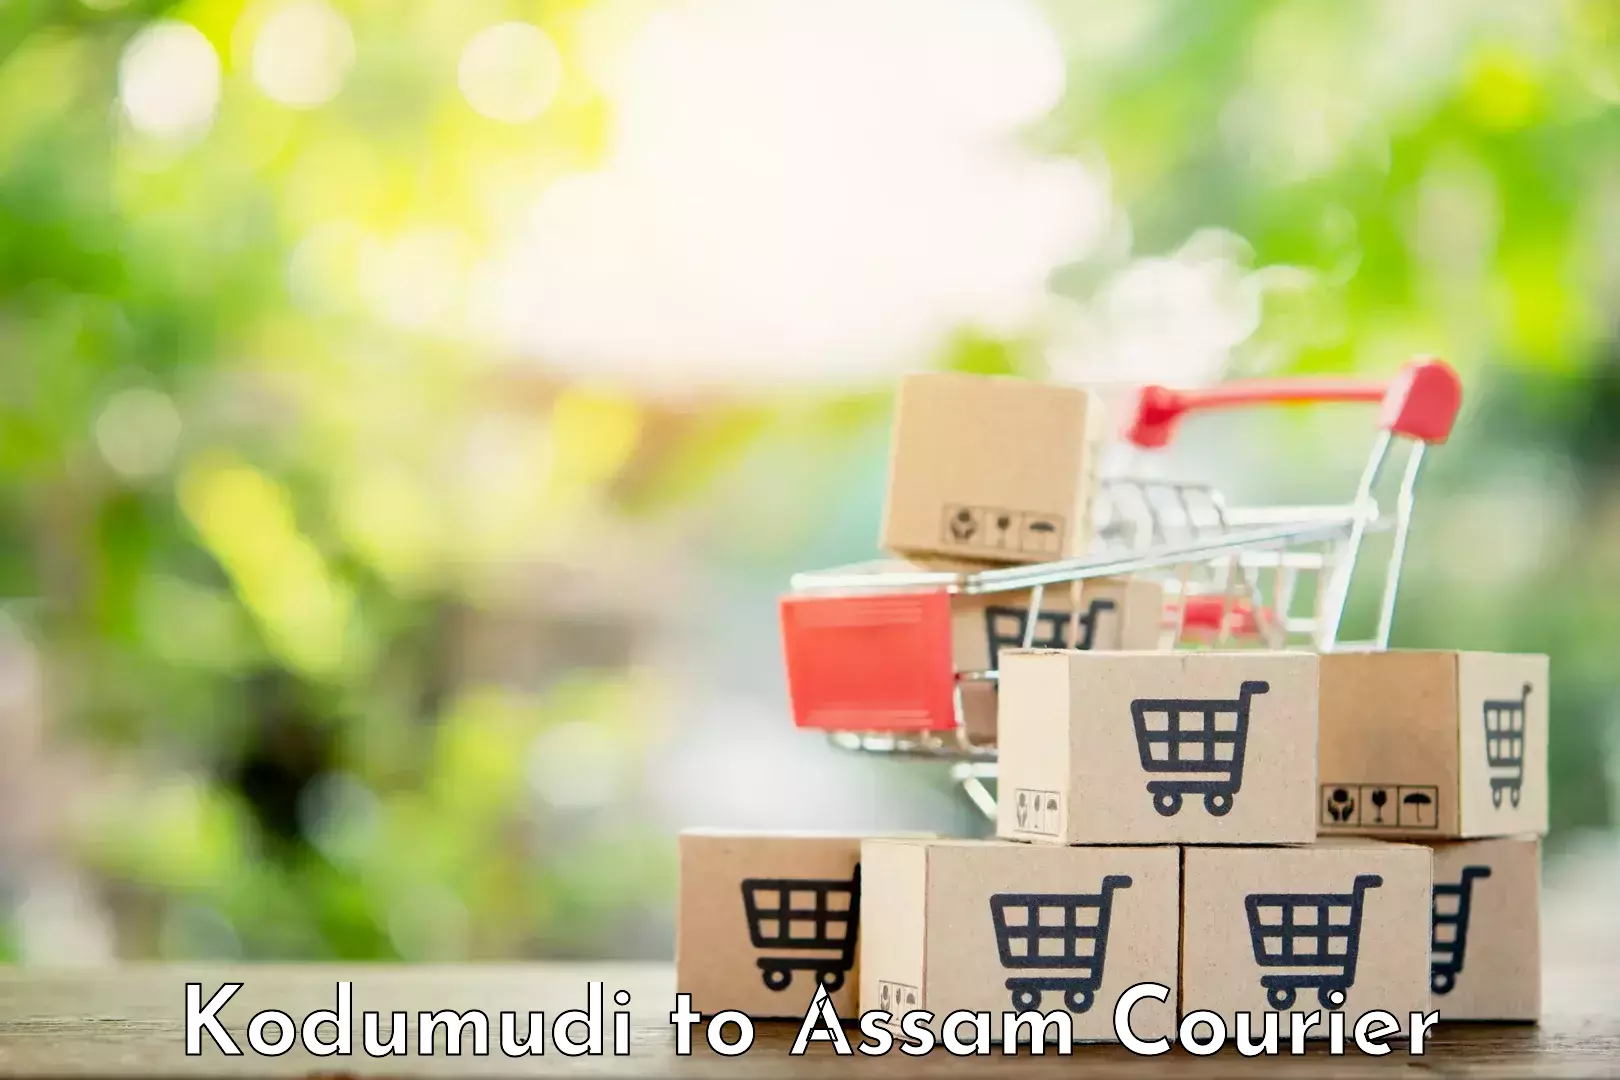 Customer-oriented courier services in Kodumudi to Tezpur